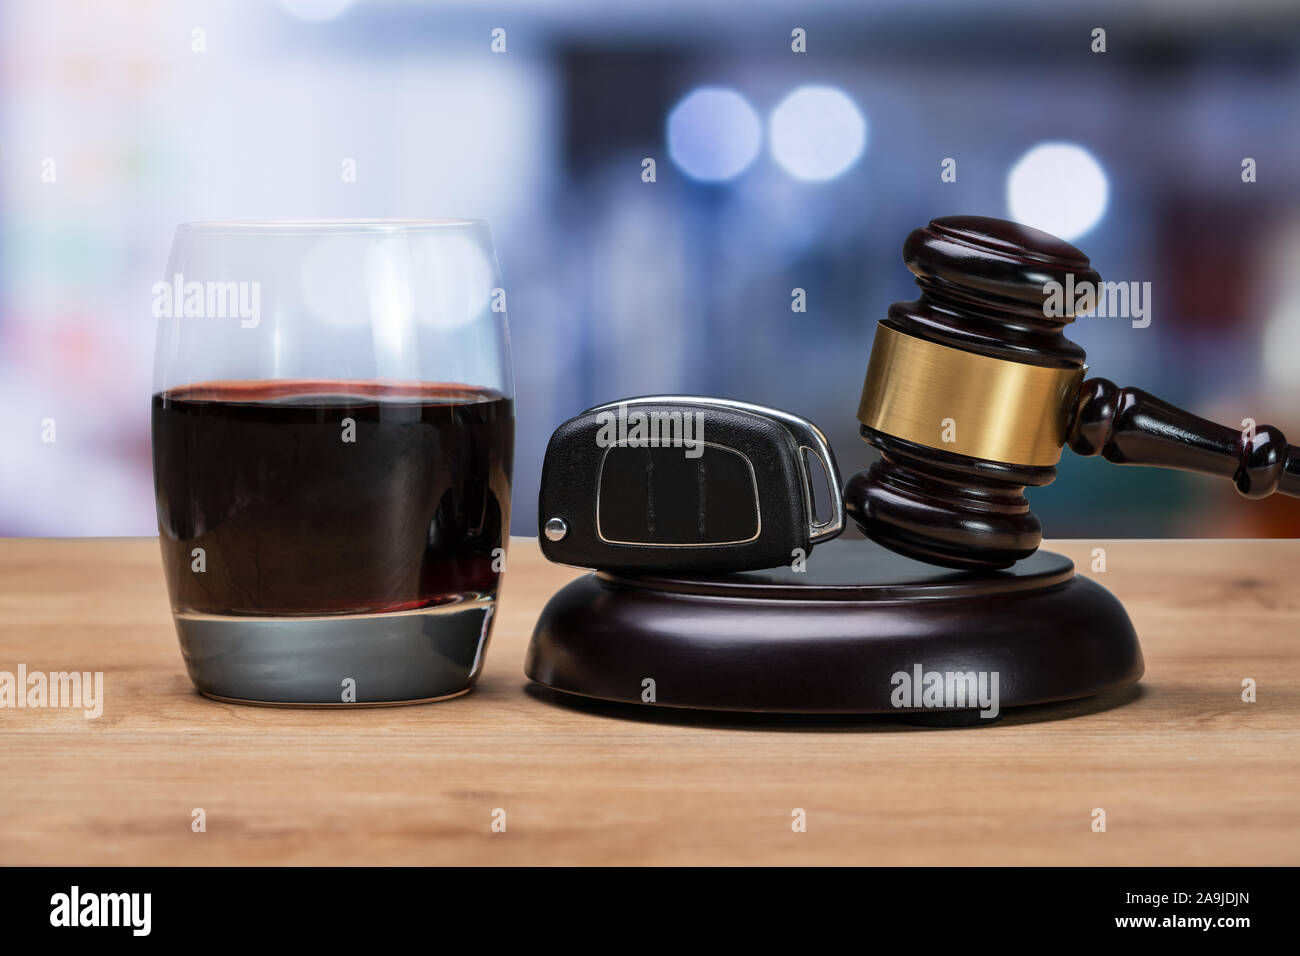 Car Key And Gavel Over Striking Block Near Glass Of Alcohol In Court Room Stock Photo